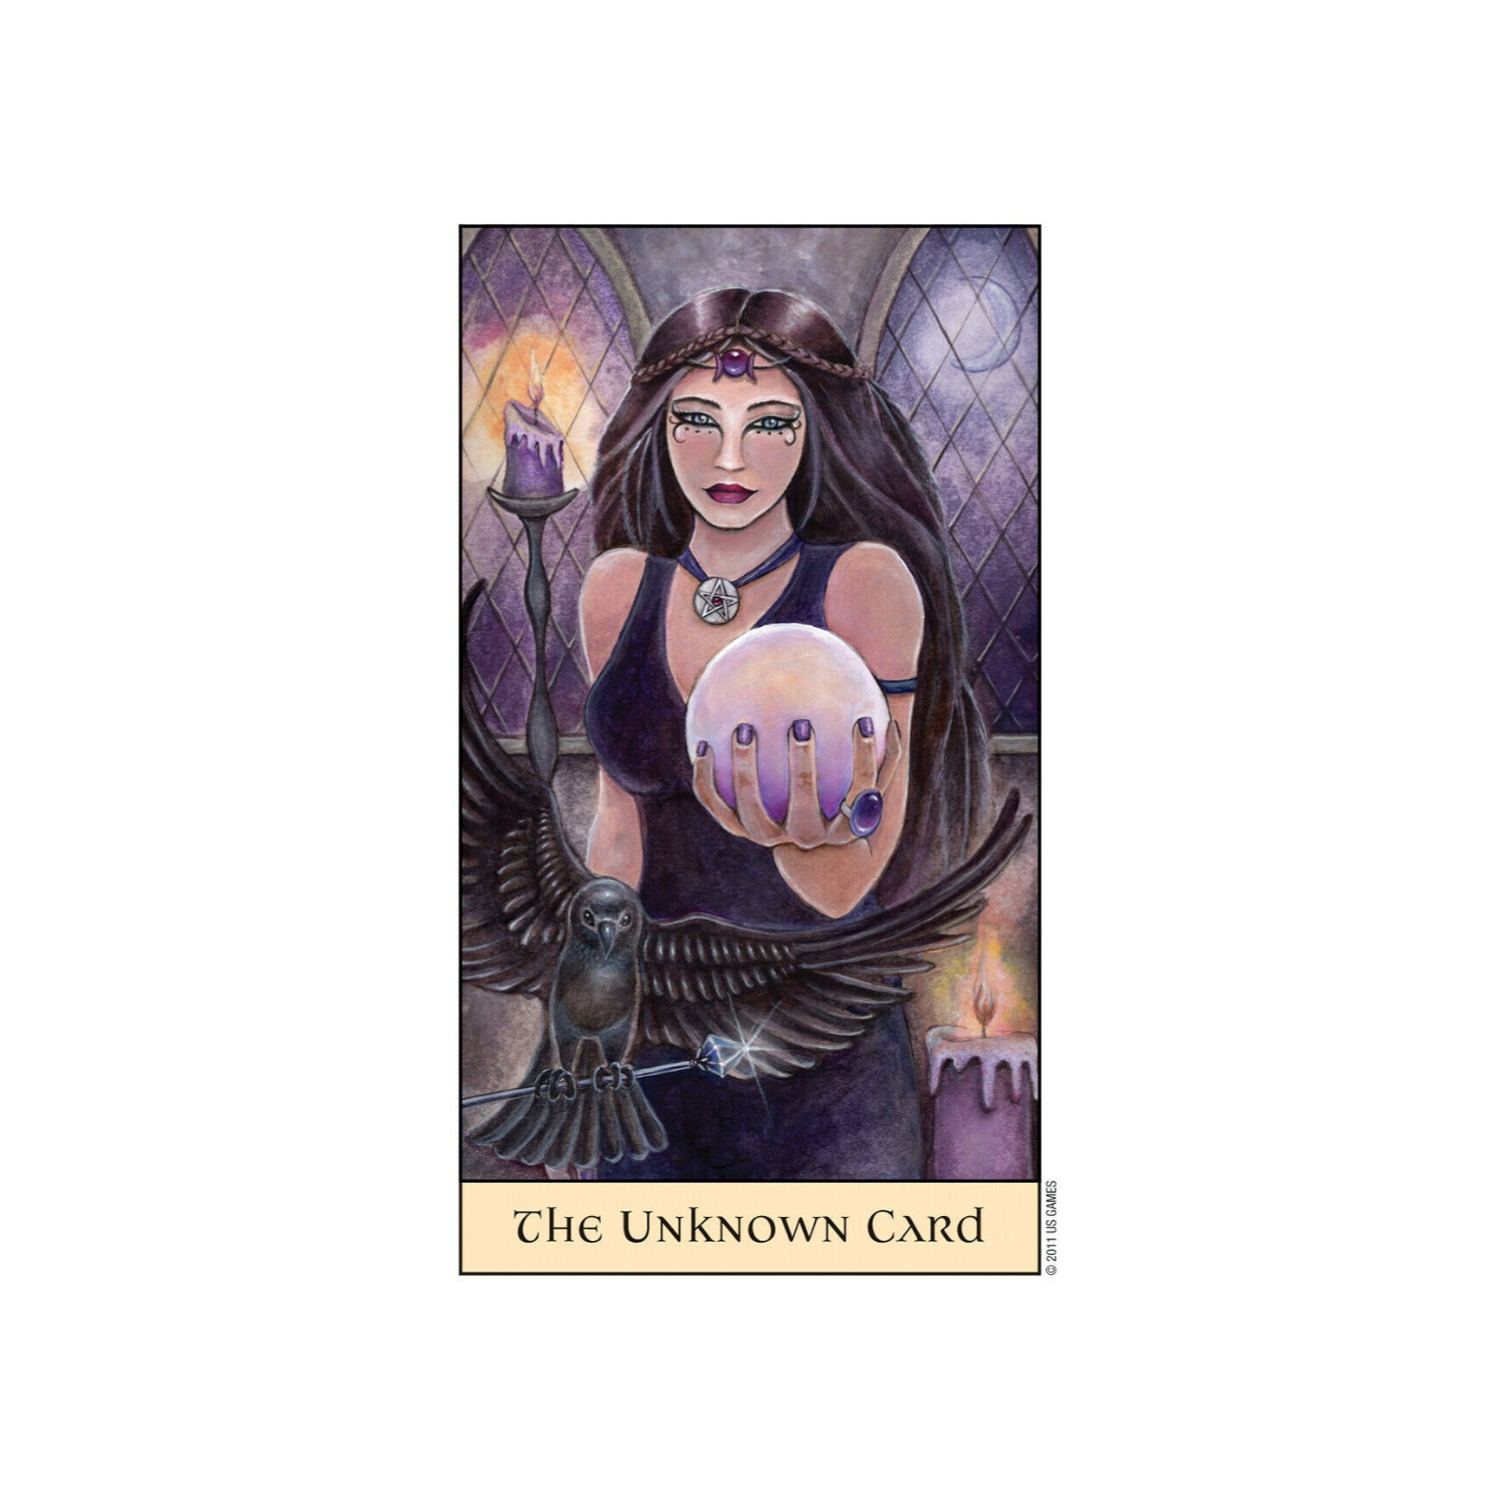 Crystal Visions Tarot Cards by Jennifer Galasso